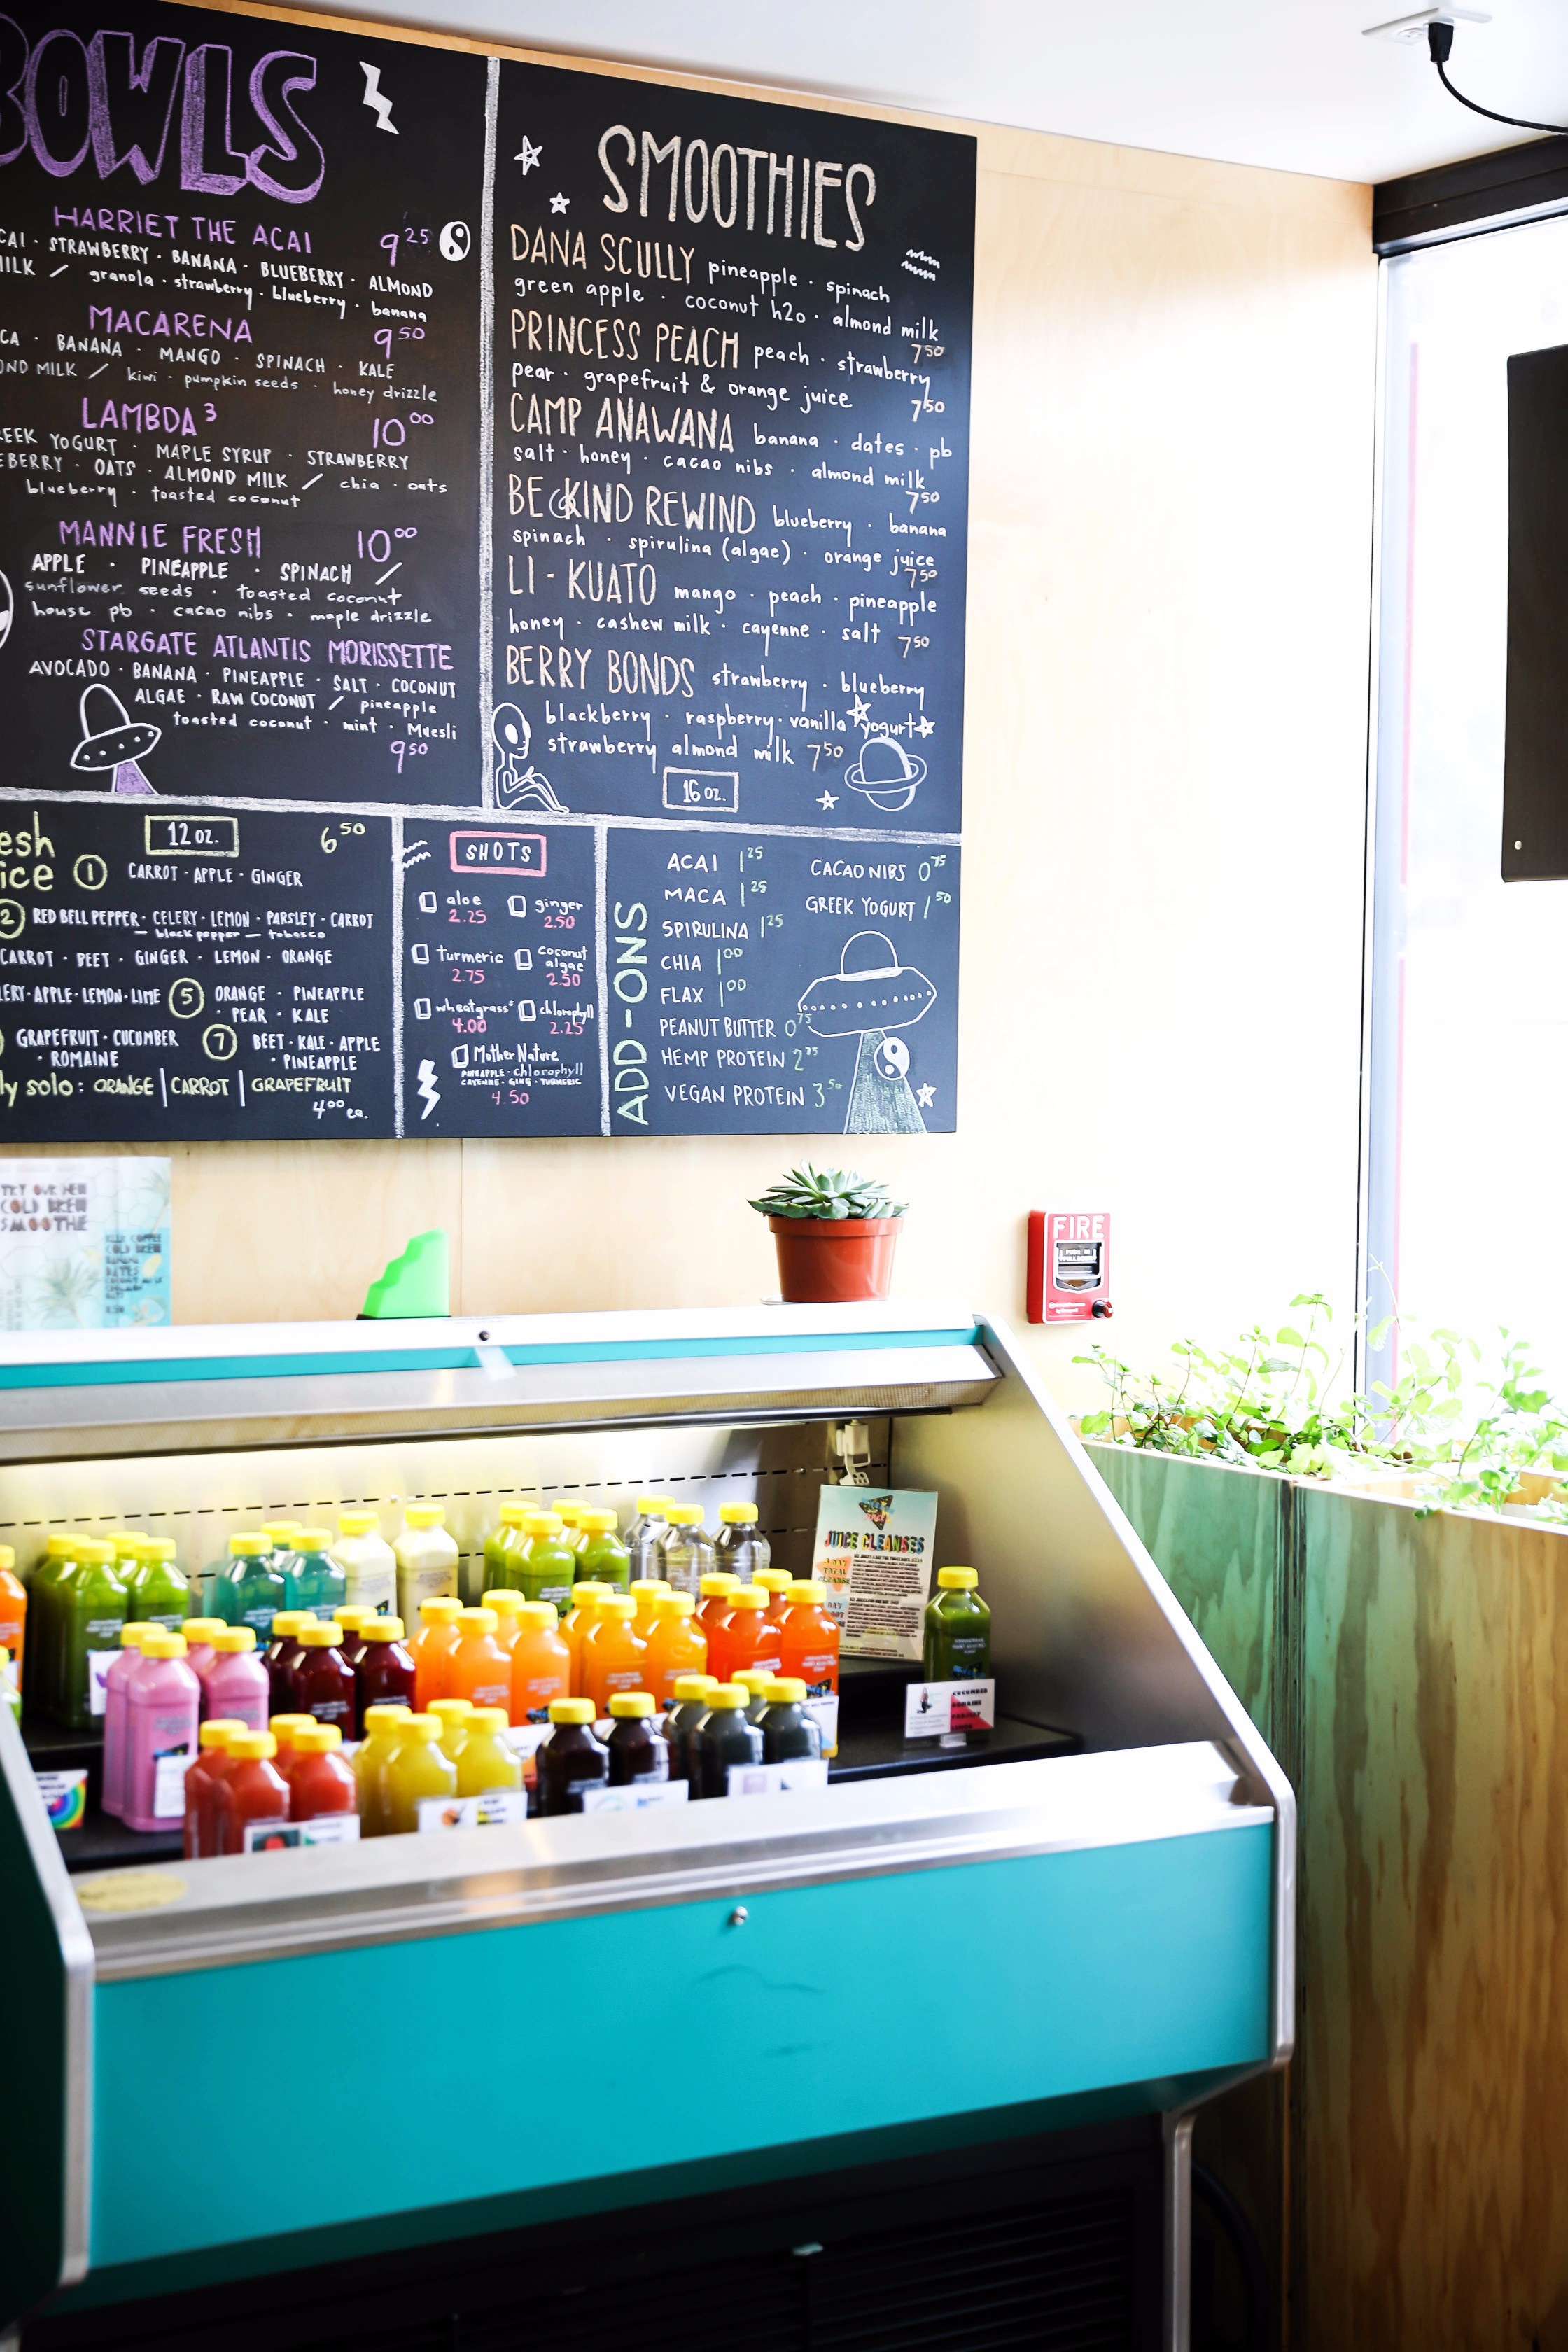 The best acai bowls, shots, and smoothies in oklahoma city! Wheeze the Juice okc meals. I am wearing the cutest avocado toast tank! By fashion blogger daily dose of charm lauren lindmar